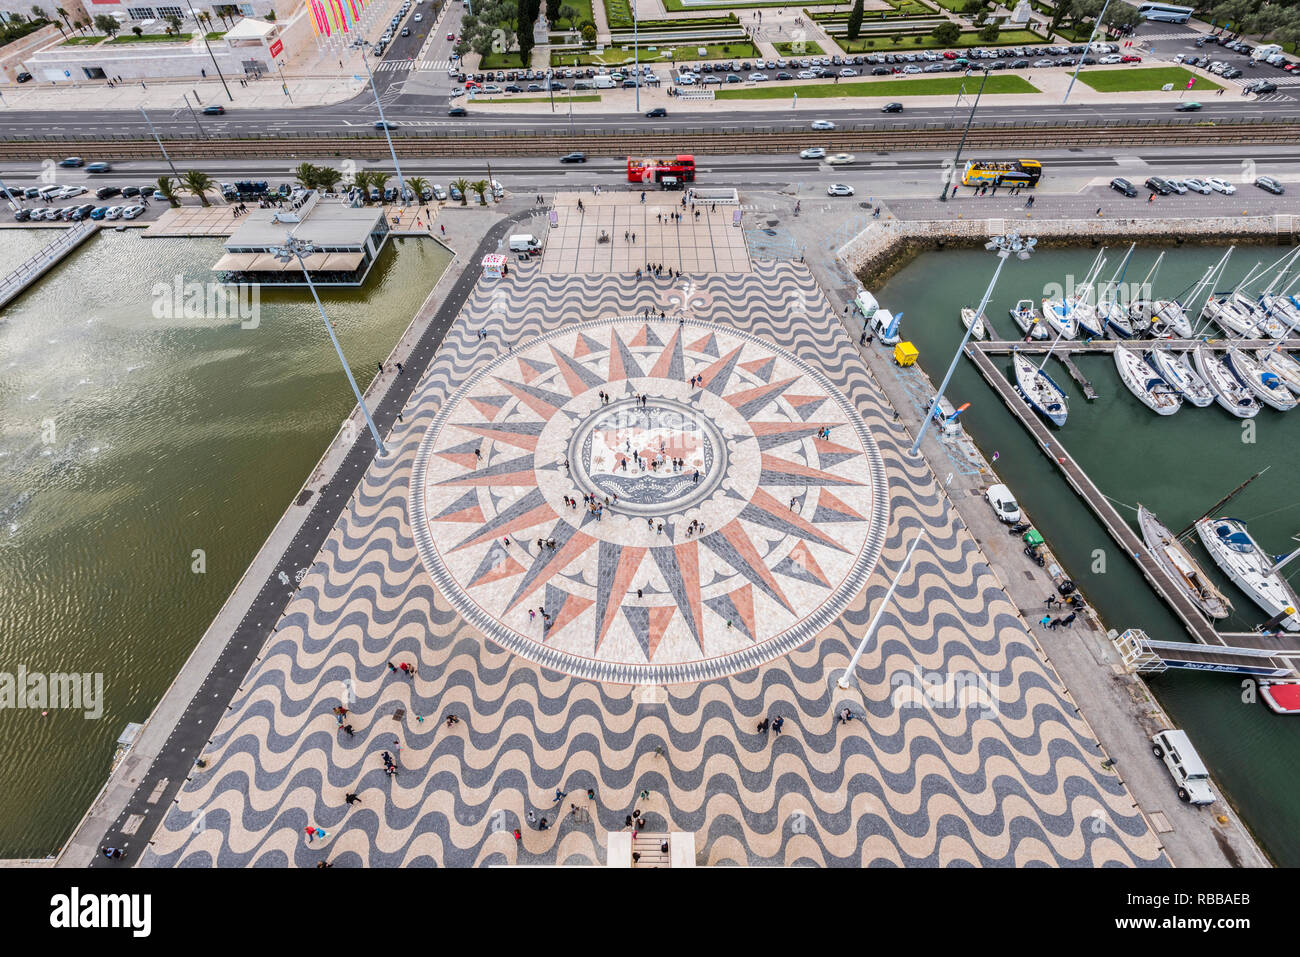 Overview of the square of the monument to the discoveries in Lisbon Stock Photo